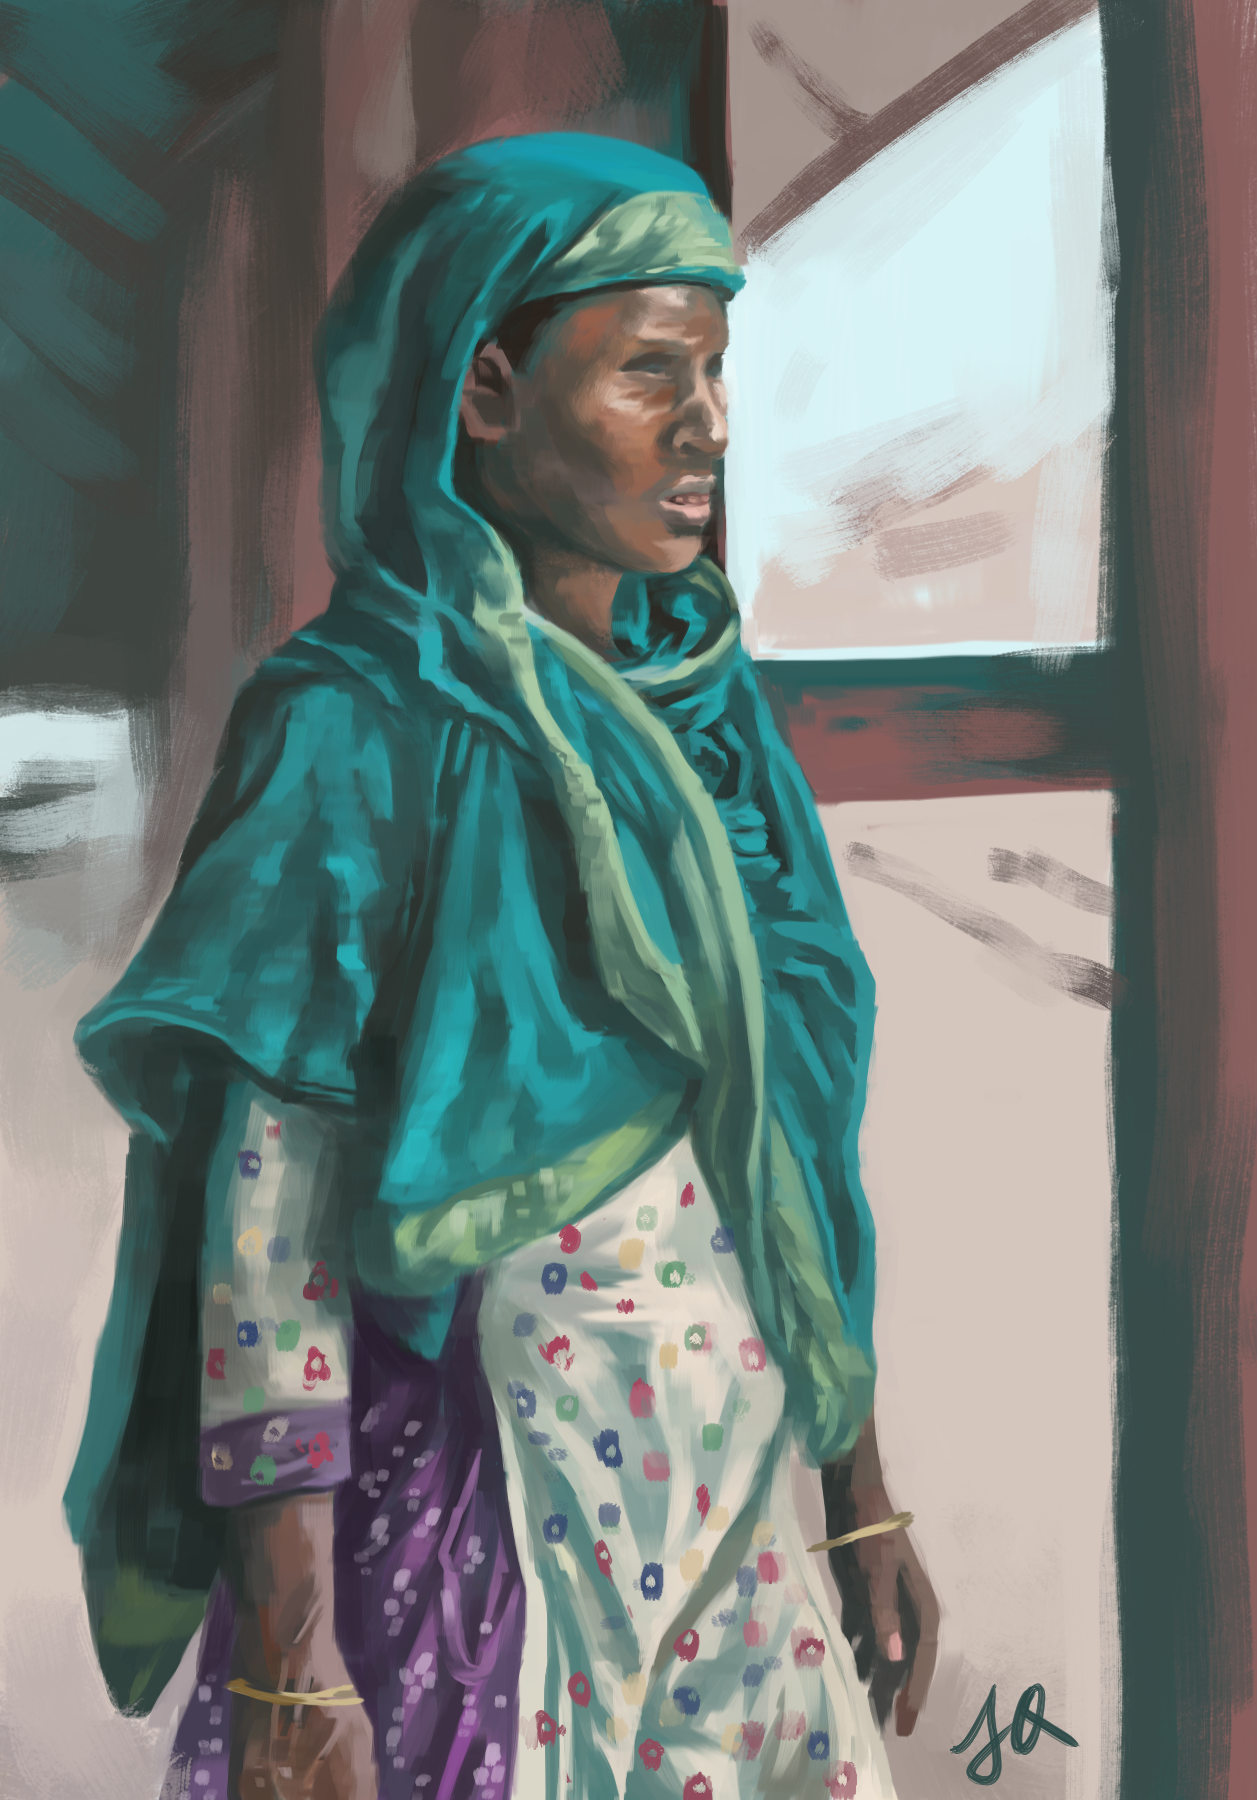 A digital painting photo study of a lady weating a vivid green, purple and cream-coloured sari, with prints on her skirt, standing and waiting at a railway station